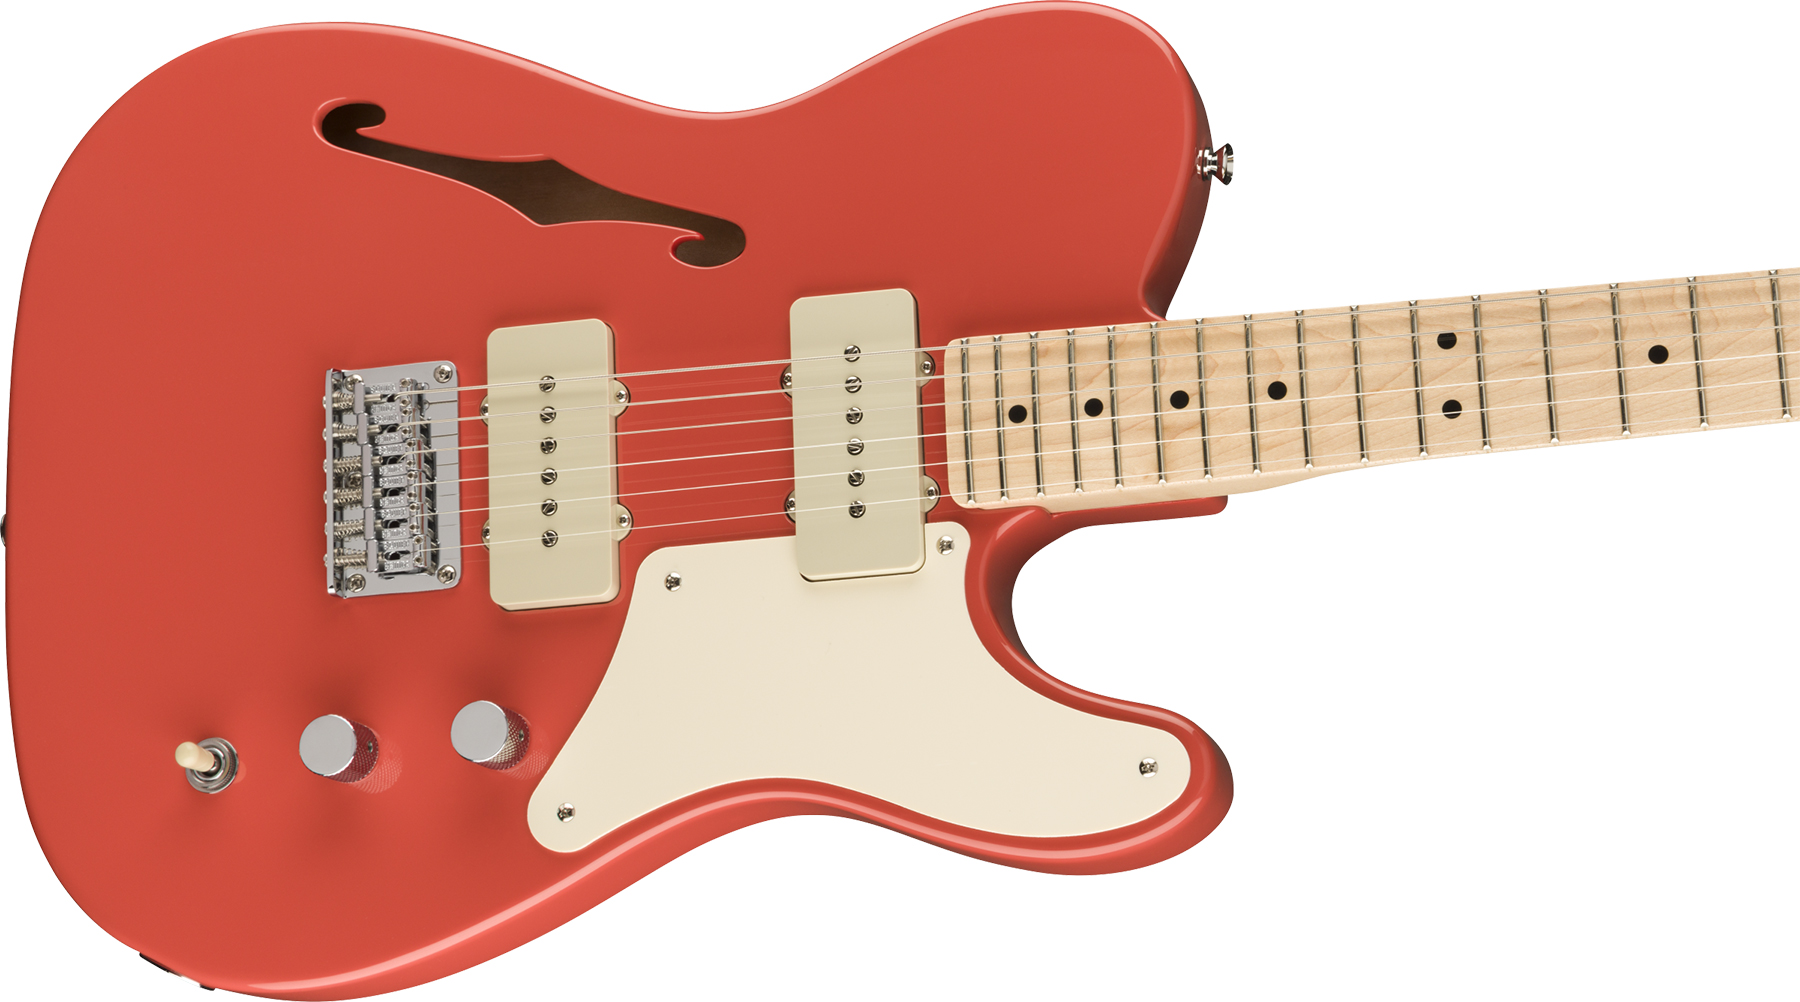 Squier Tele Thinline Cabronita Paranormal Ss Ht Mn - Fiesta Red - Semi-hollow electric guitar - Variation 2